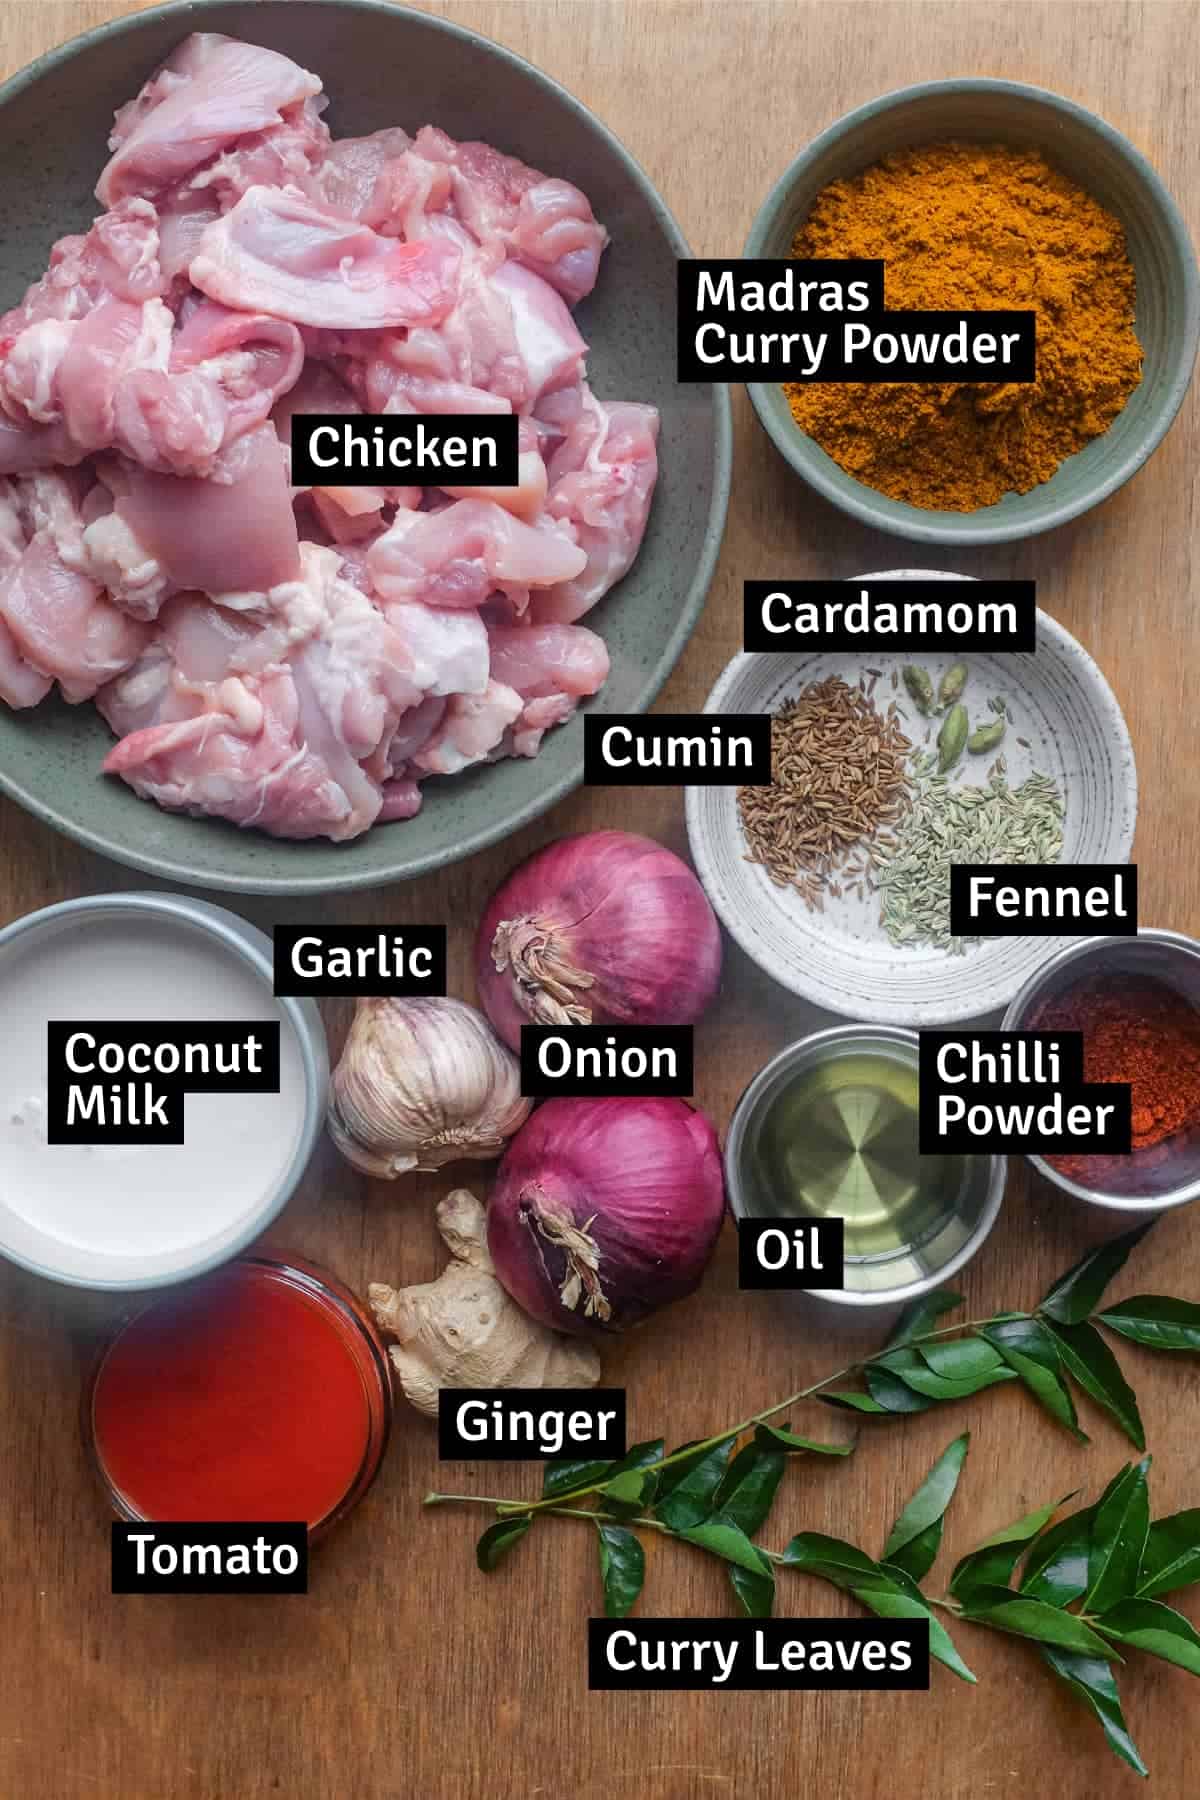 The ingredients for a Madras Chicken Curry